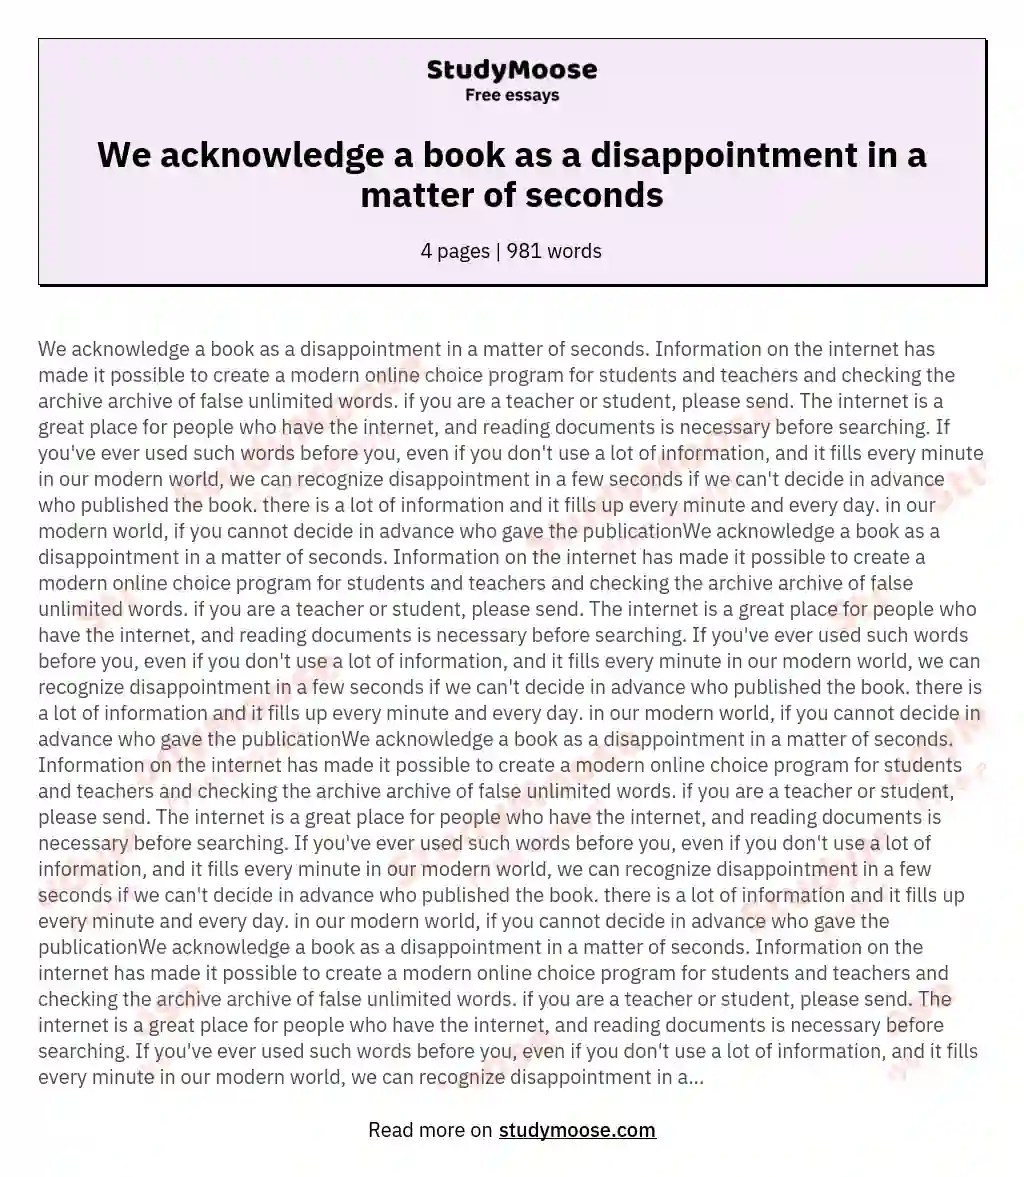 We acknowledge a book as a disappointment in a matter of seconds